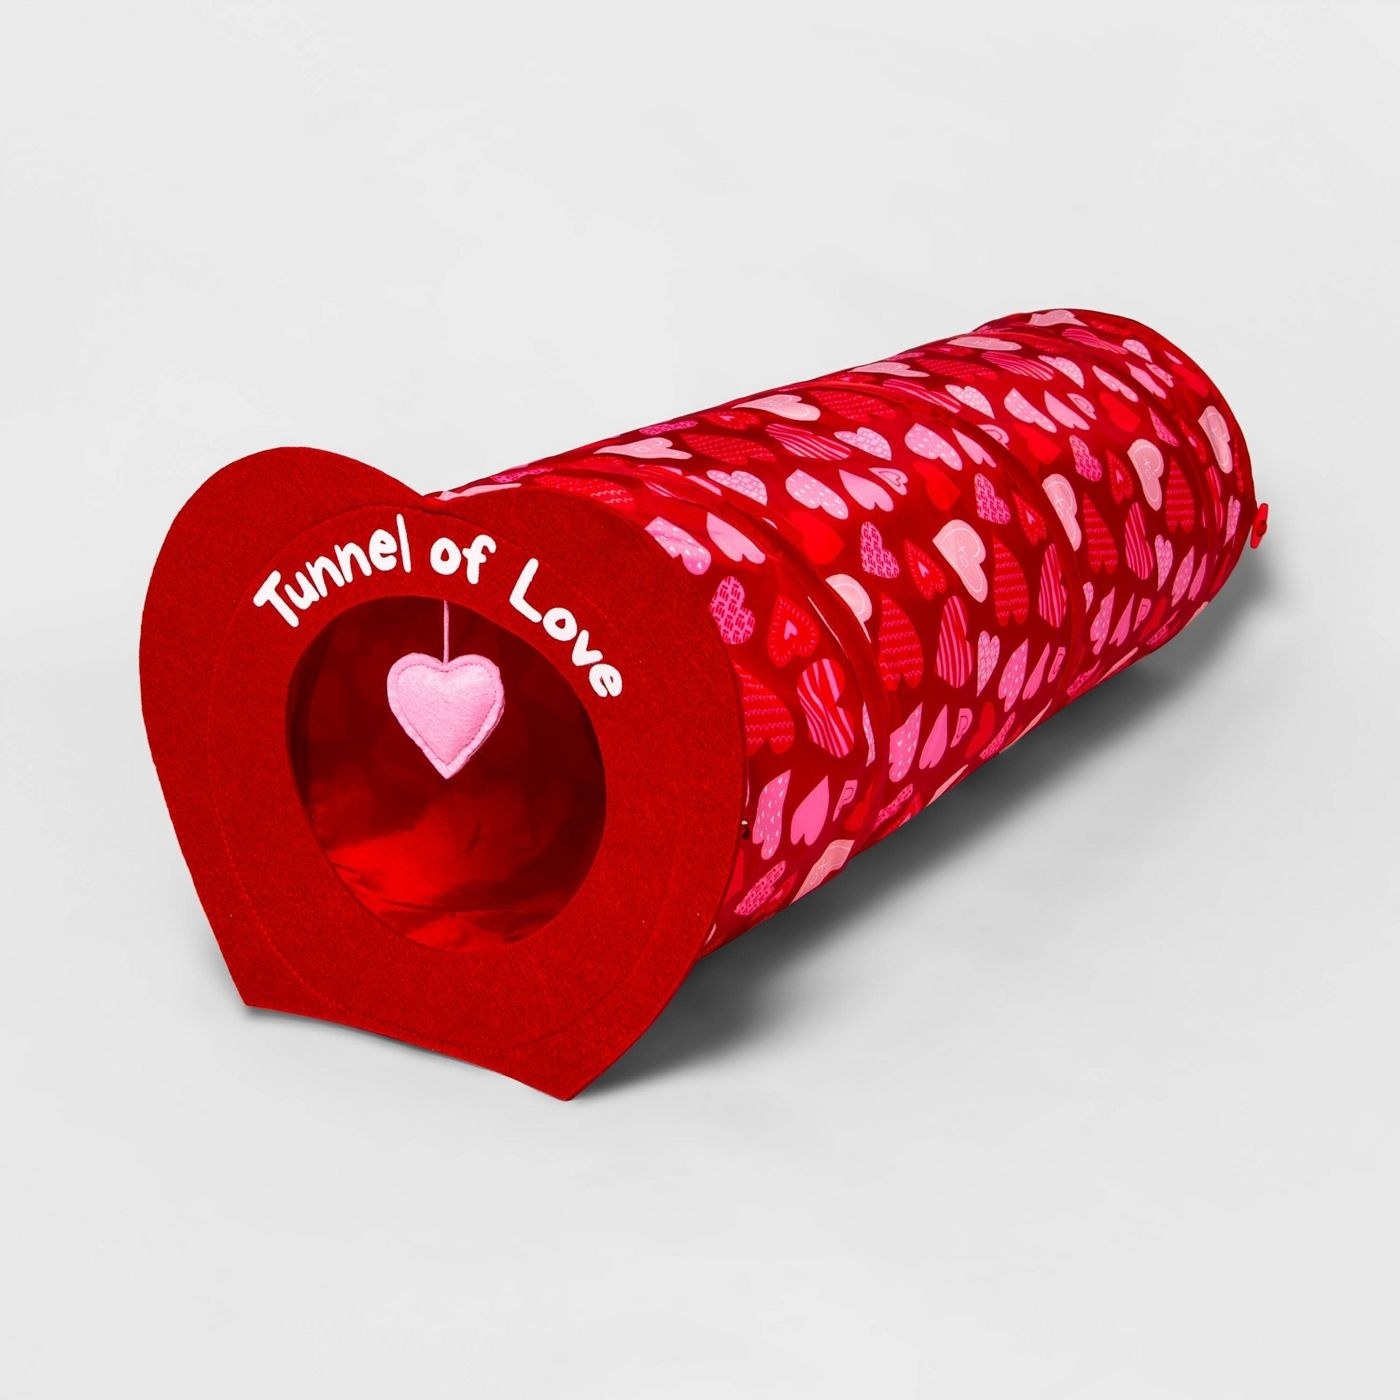 The tunnel, which has a heart-shaped opening, and a foldable heart-print tube